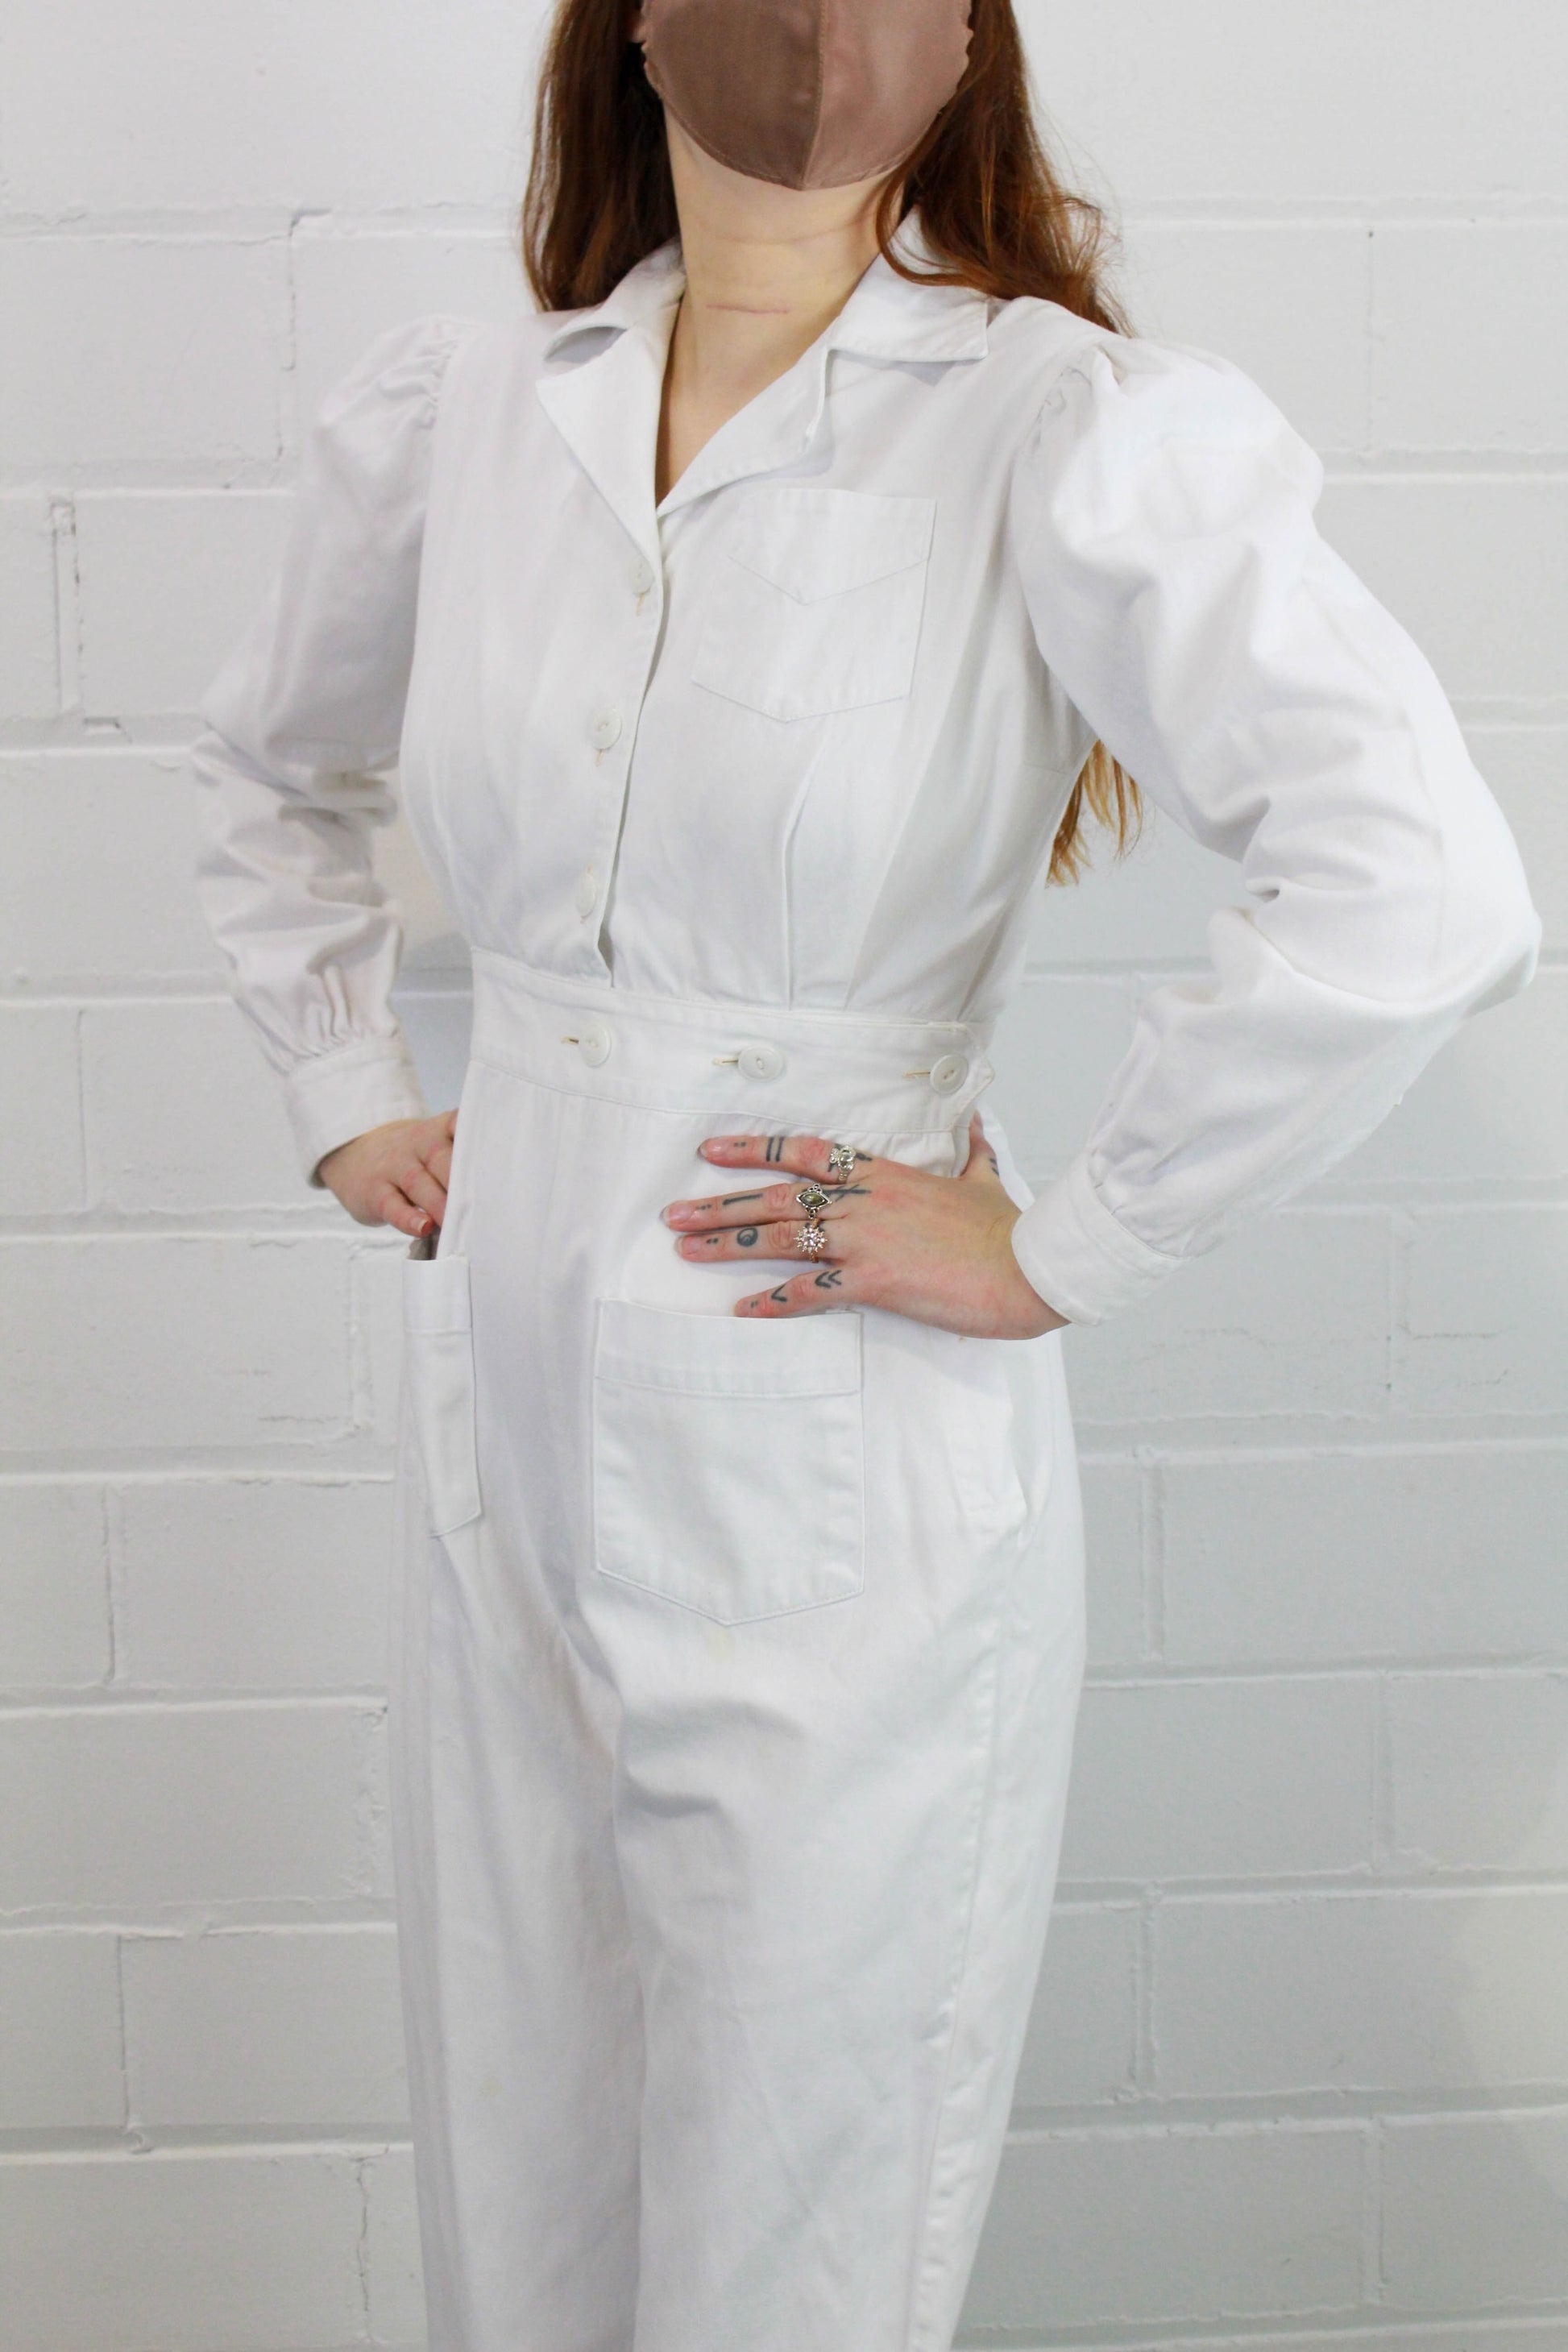 reproduction Rosie the Riveter WWII Factory Worker Women's 1940s White Coveralls/Jumpsuit Button Front Puff Sleeves